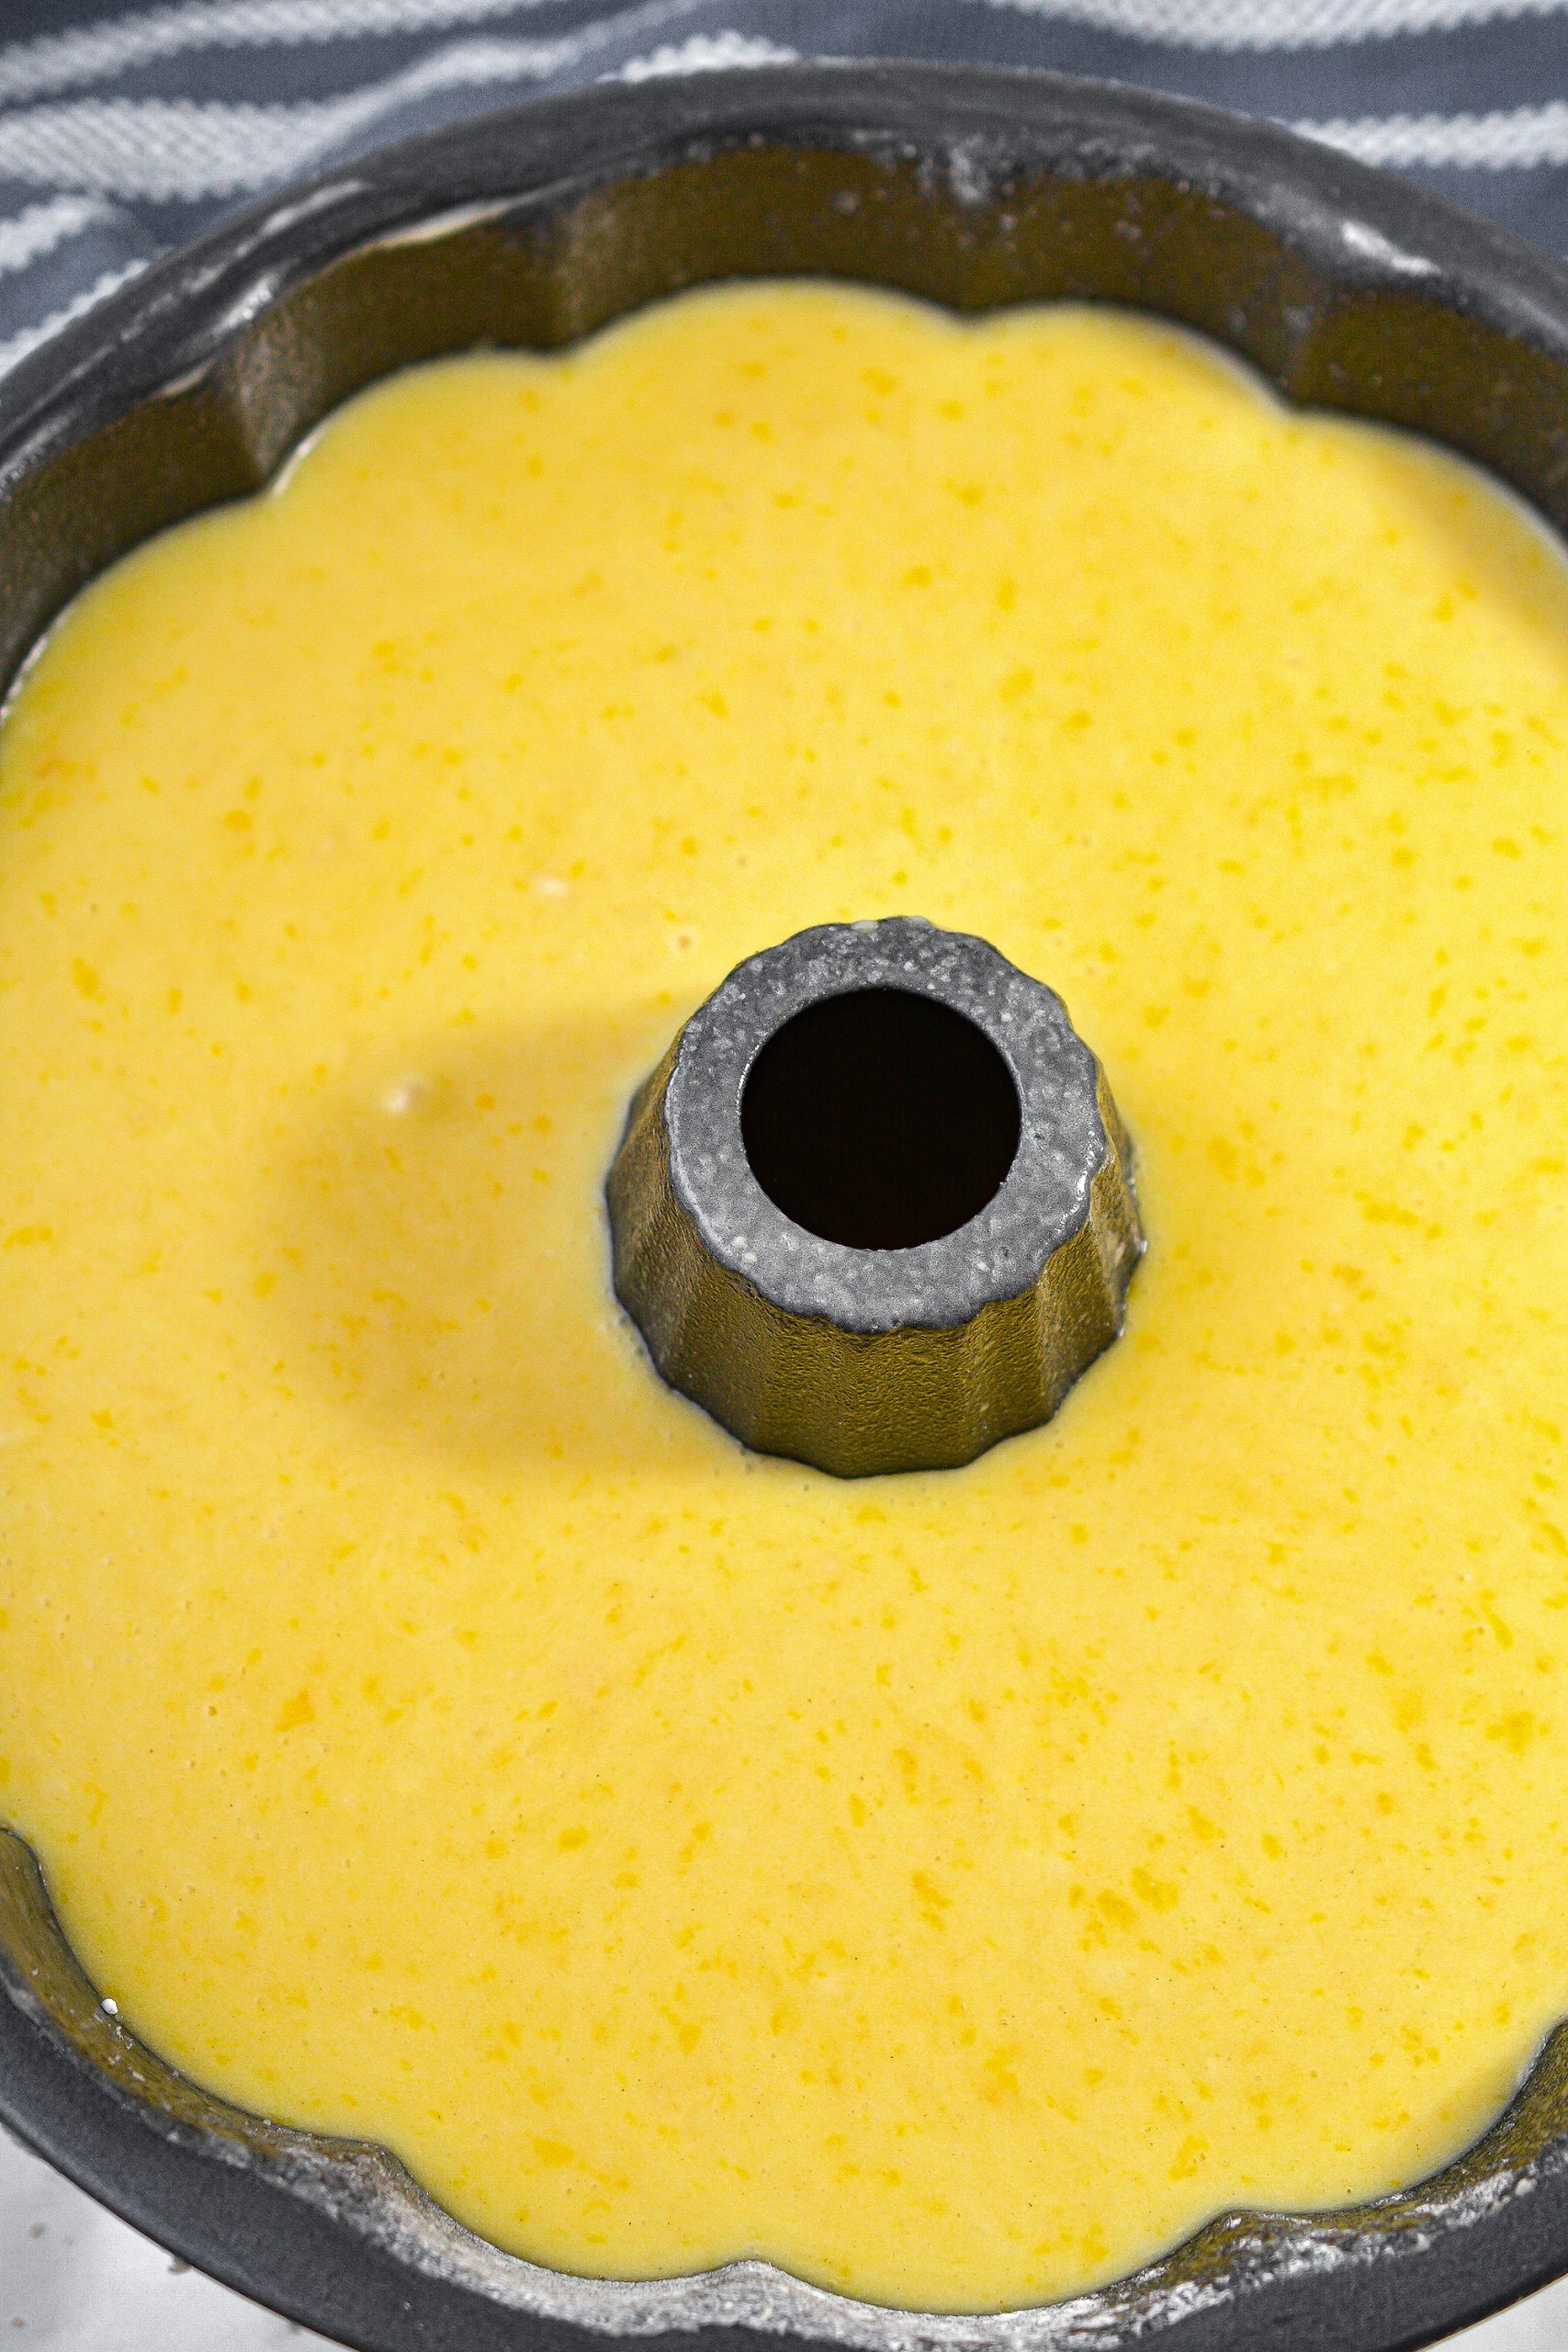 Pour the mixture into a well greased and floured bundt pan.